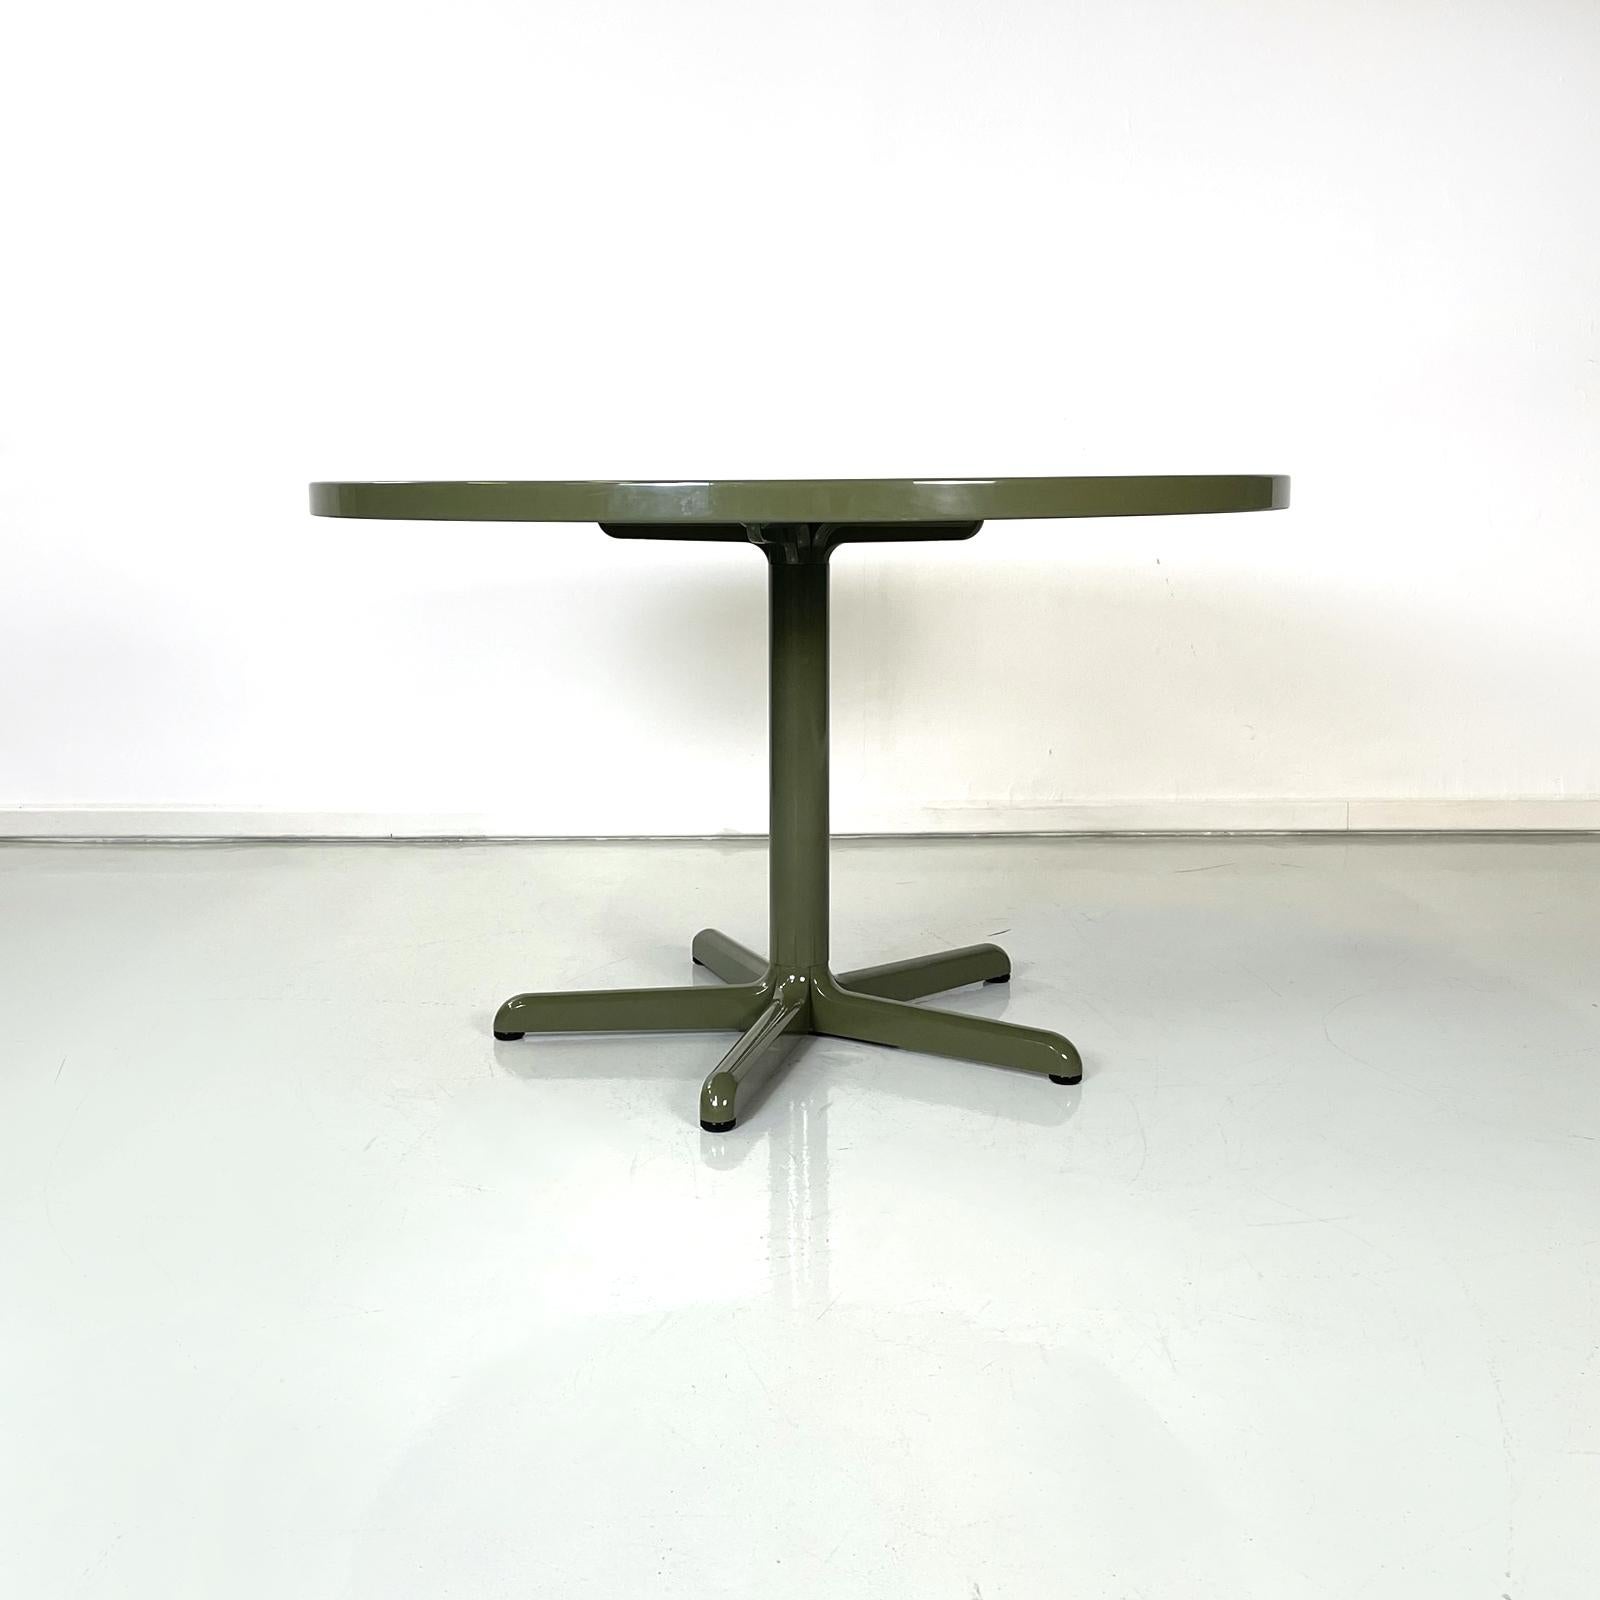 Italian modern Round dining table in green lacquered wood by Anonima Castelli, 1981
Fantastic round dining table in green lacquered wood. The round top is thick. The central cylindrical structure ends with the 5-star base.
It is produced by